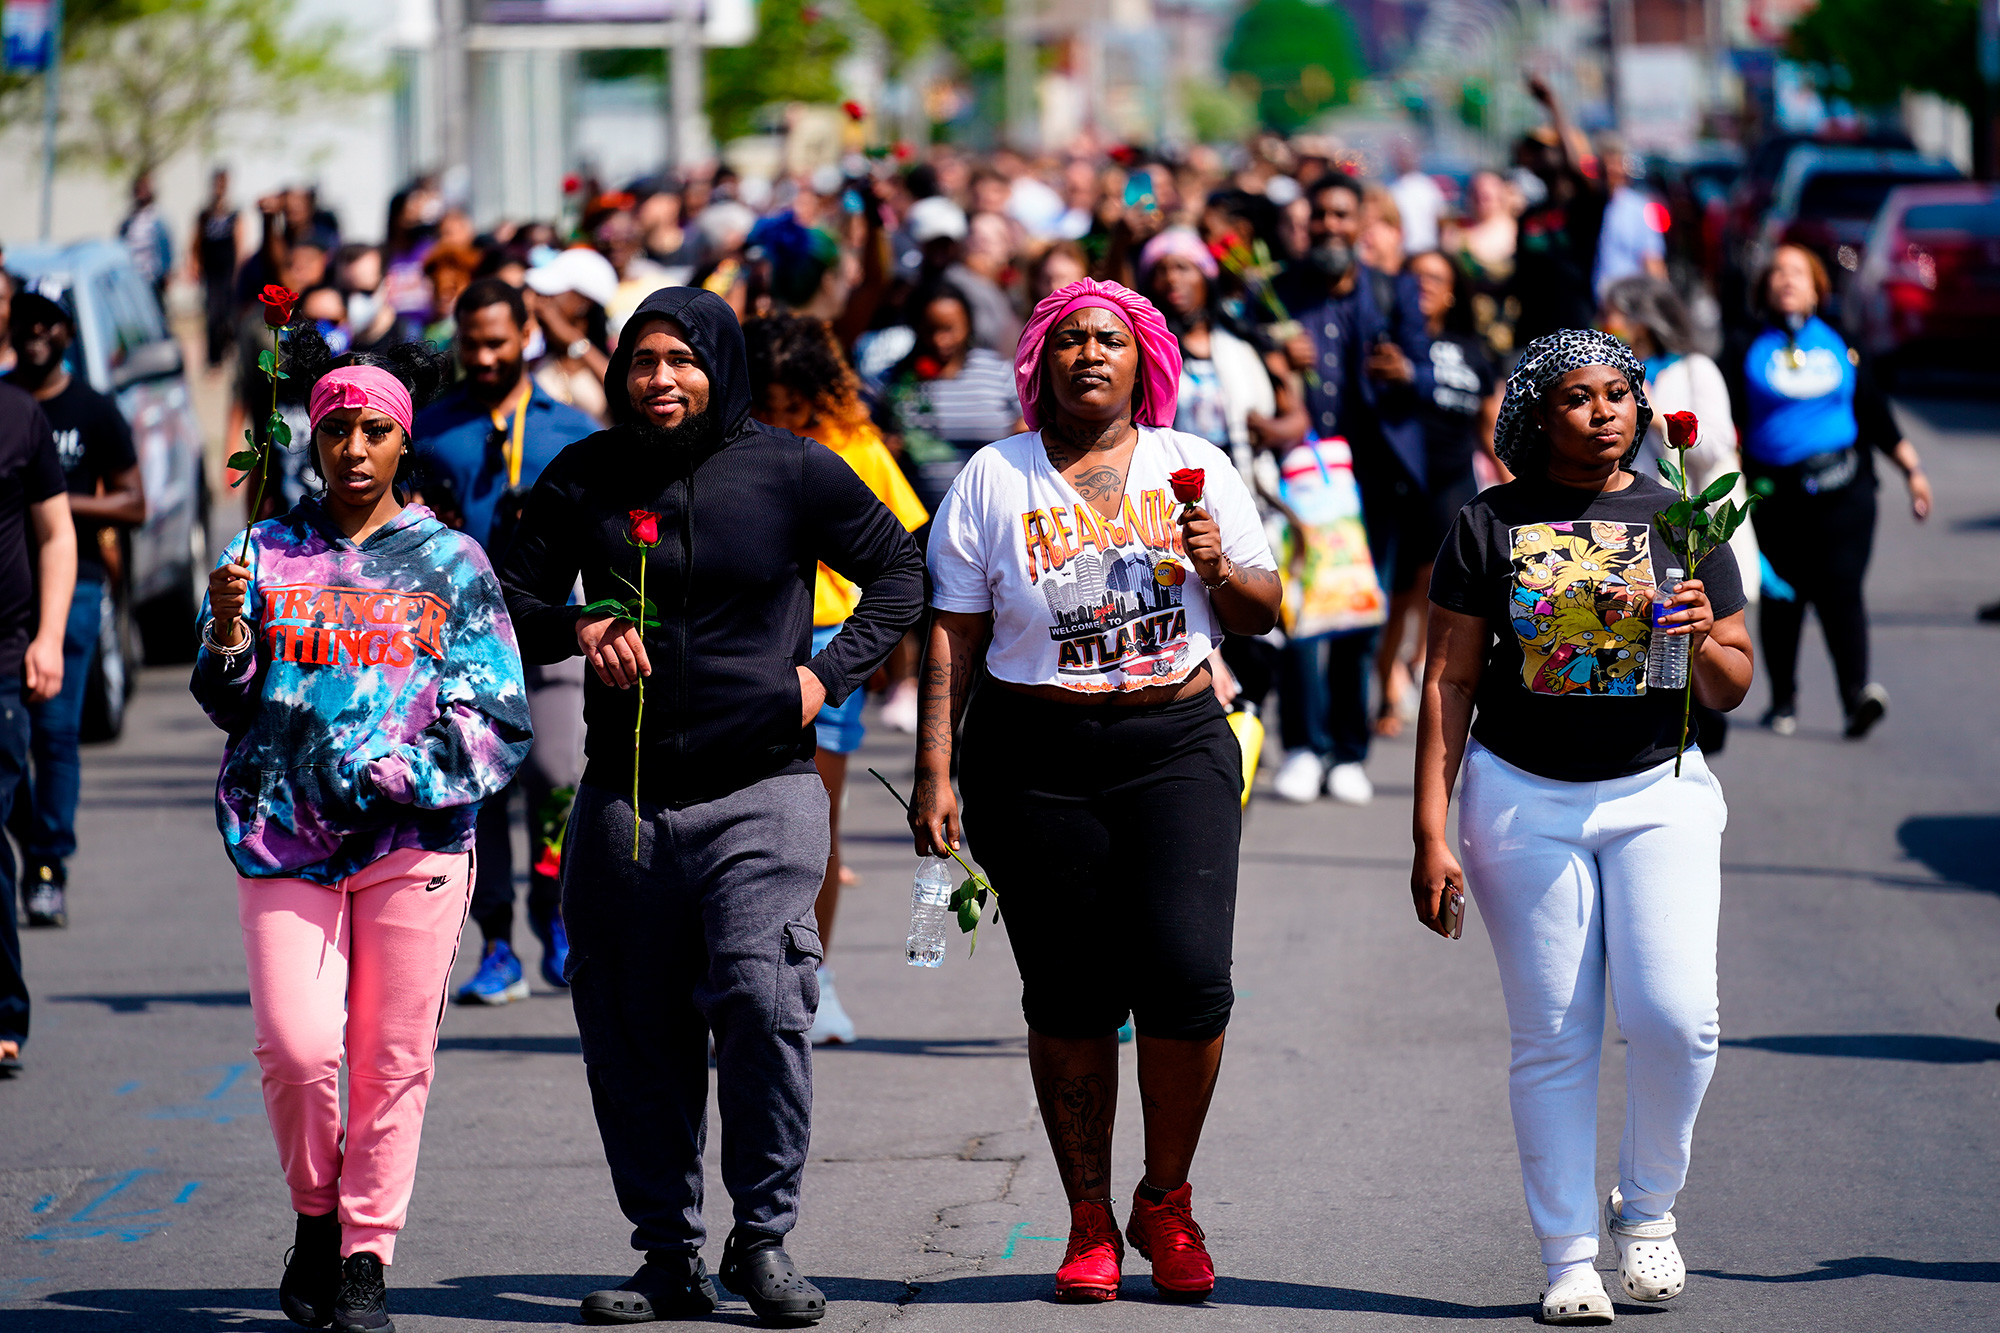 People march to the scene of the mass shooting at a supermarket in Buffalo, New York on Sunday, May 15.